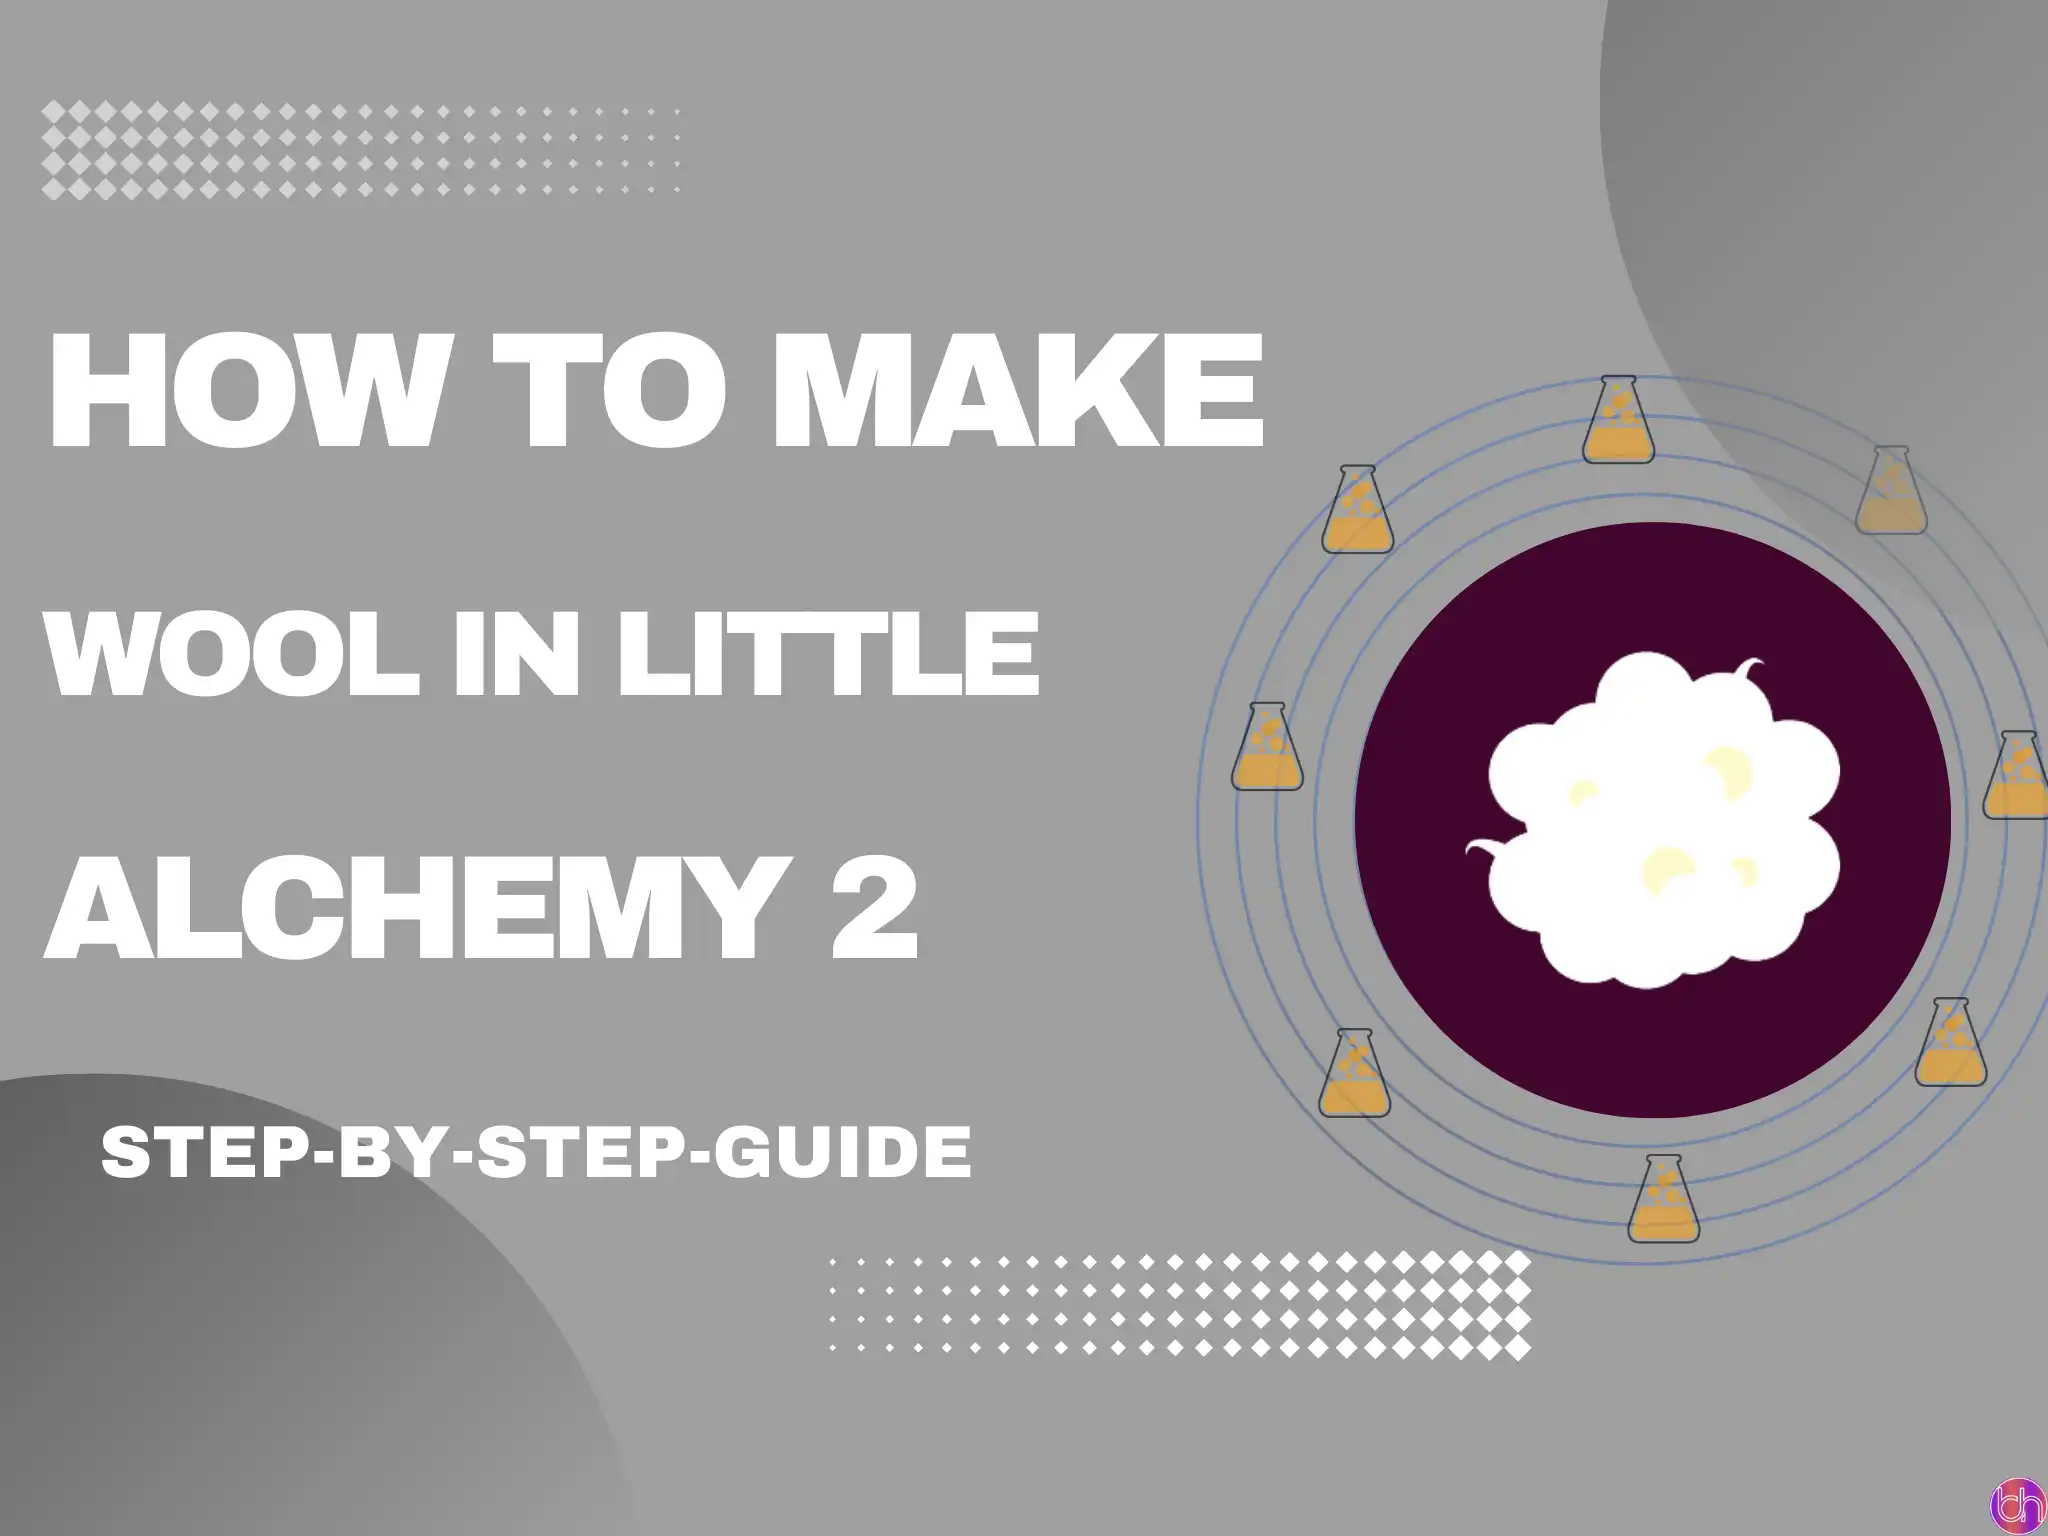 How to make Wool in Little Alchemy 2